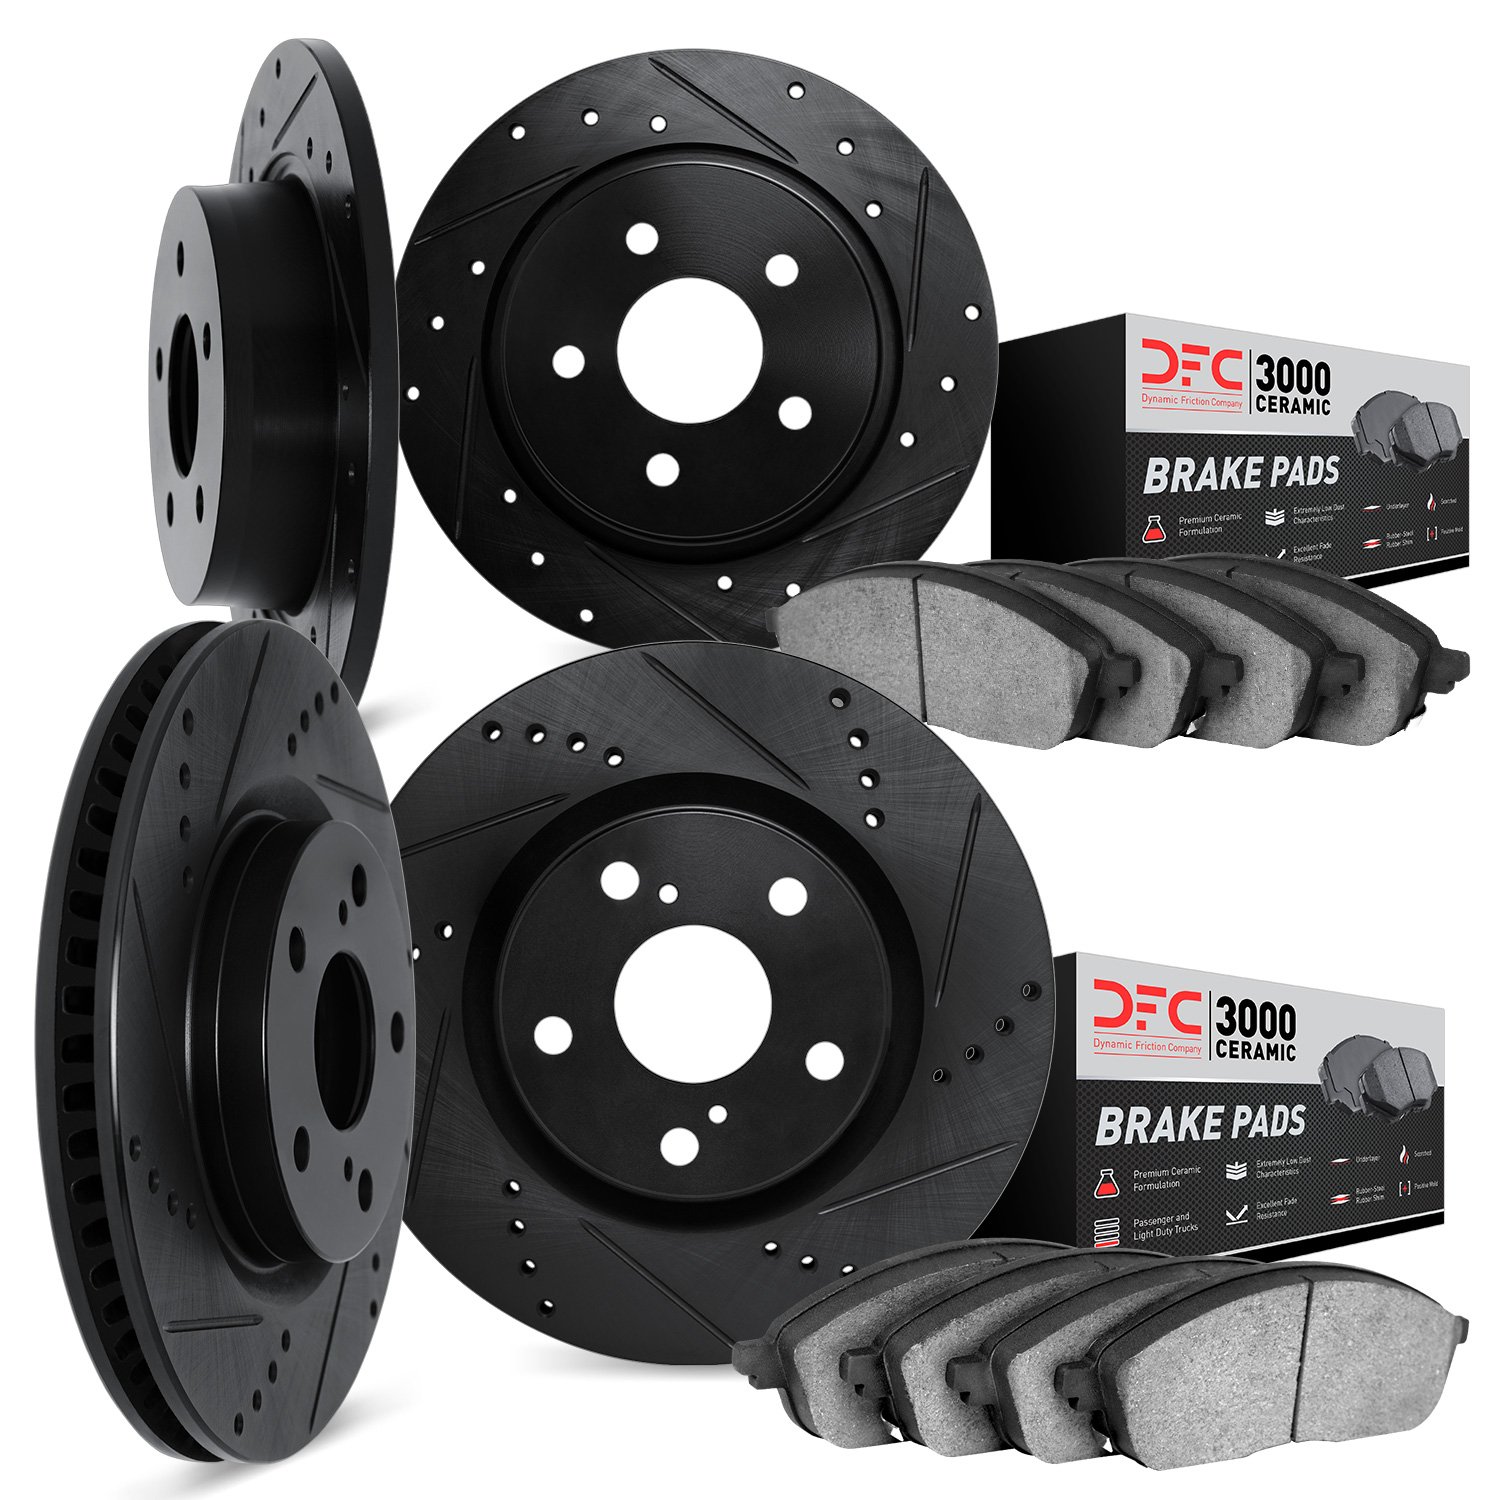 8304-59055 Drilled/Slotted Brake Rotors with 3000-Series Ceramic Brake Pads Kit [Black], 2004-2008 Acura/Honda, Position: Front